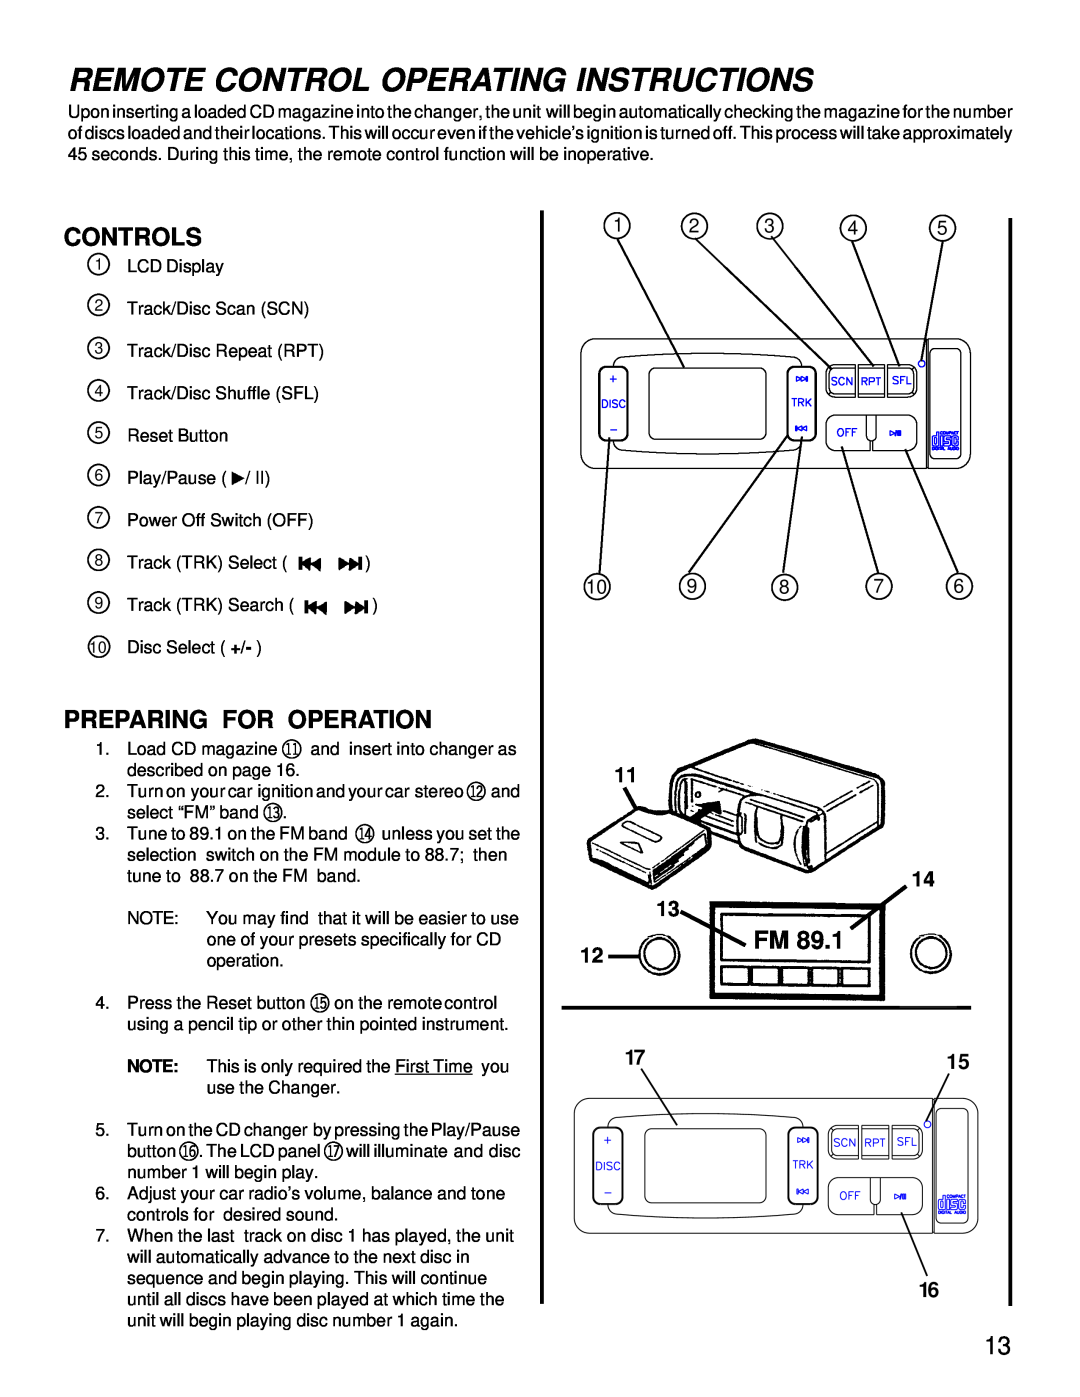 Audiovox ACC56, ACC-56 owner manual Remote Control Operating Instructions, Controls, Preparing For Operation, 11 14, 1715 